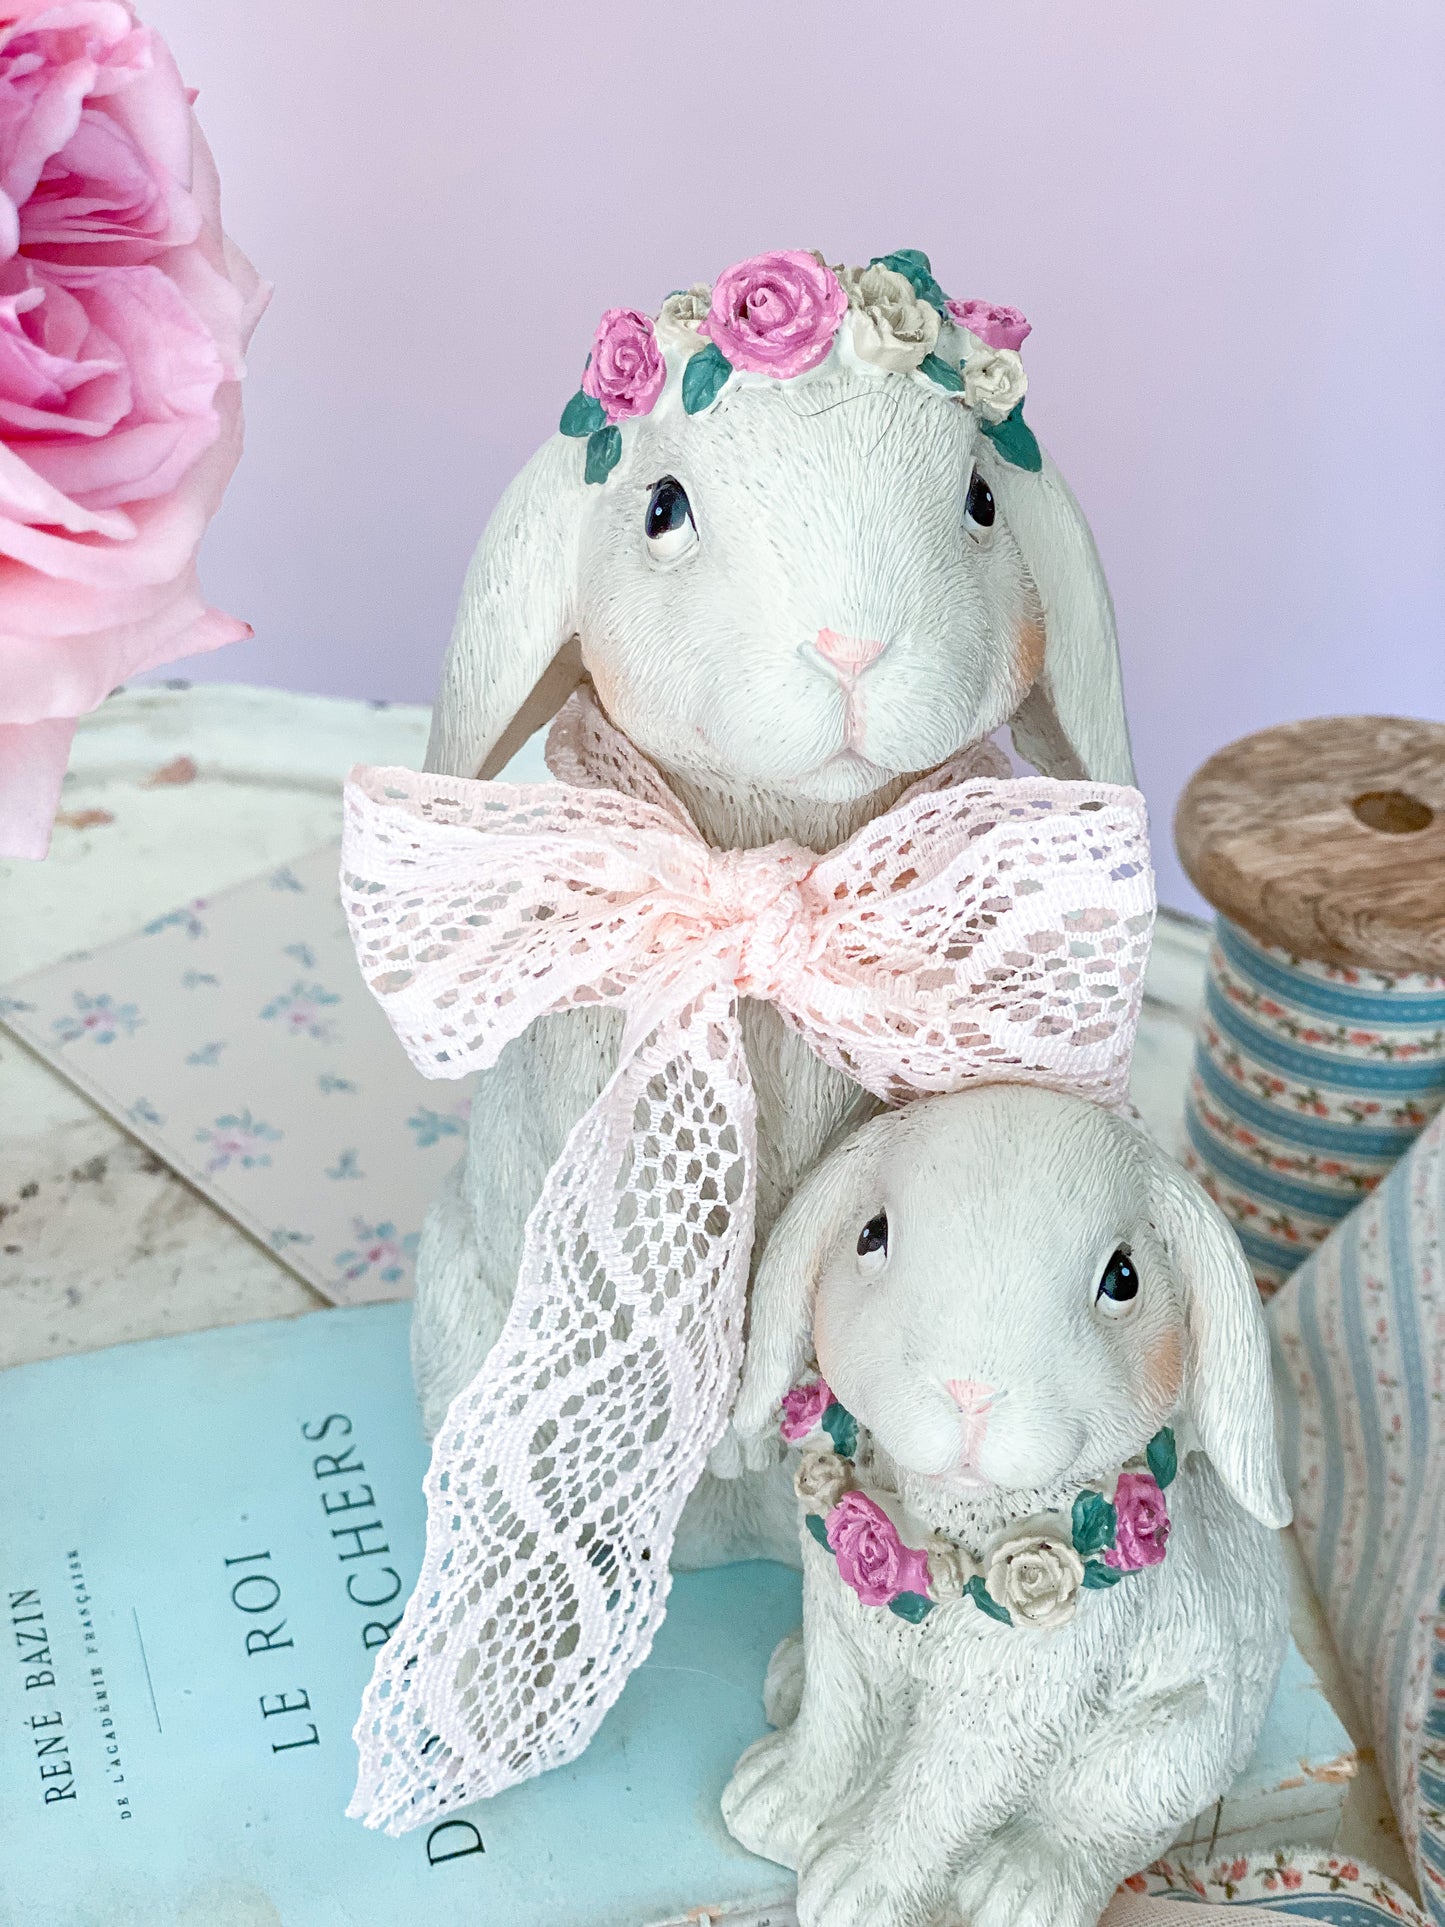 Mama & Baby Easter Bunny with Pastel Pink Floral Headbands Figurine